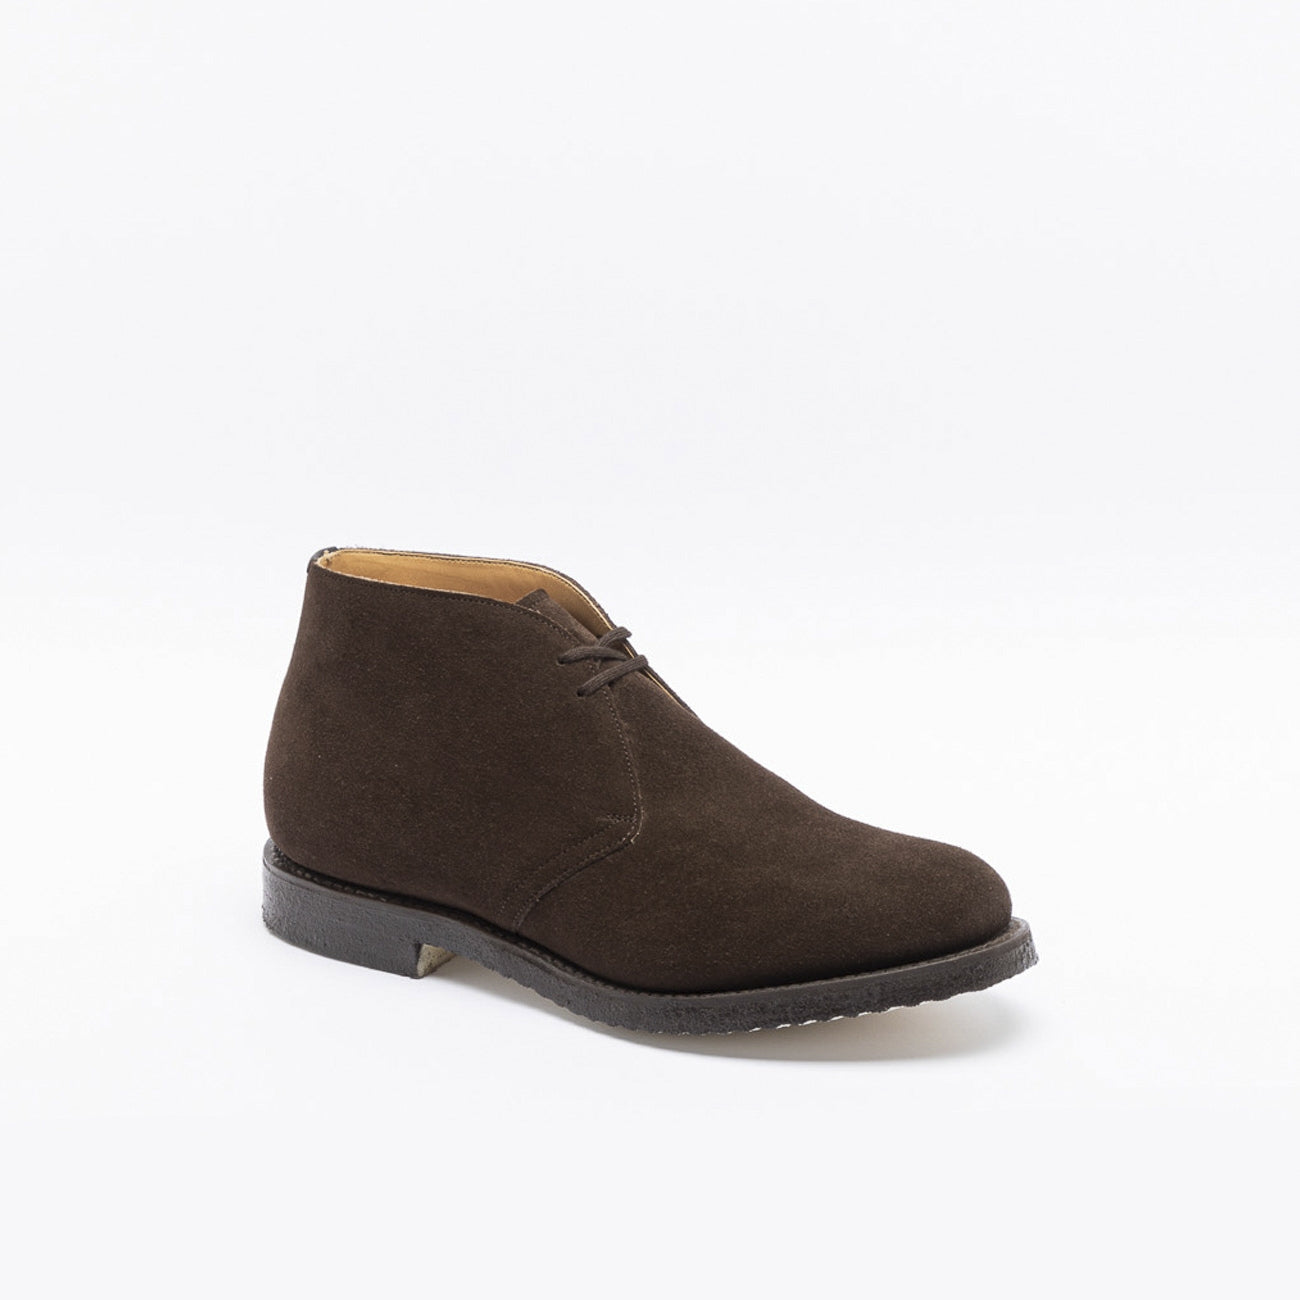 Church's brown suede boot (Para sole)